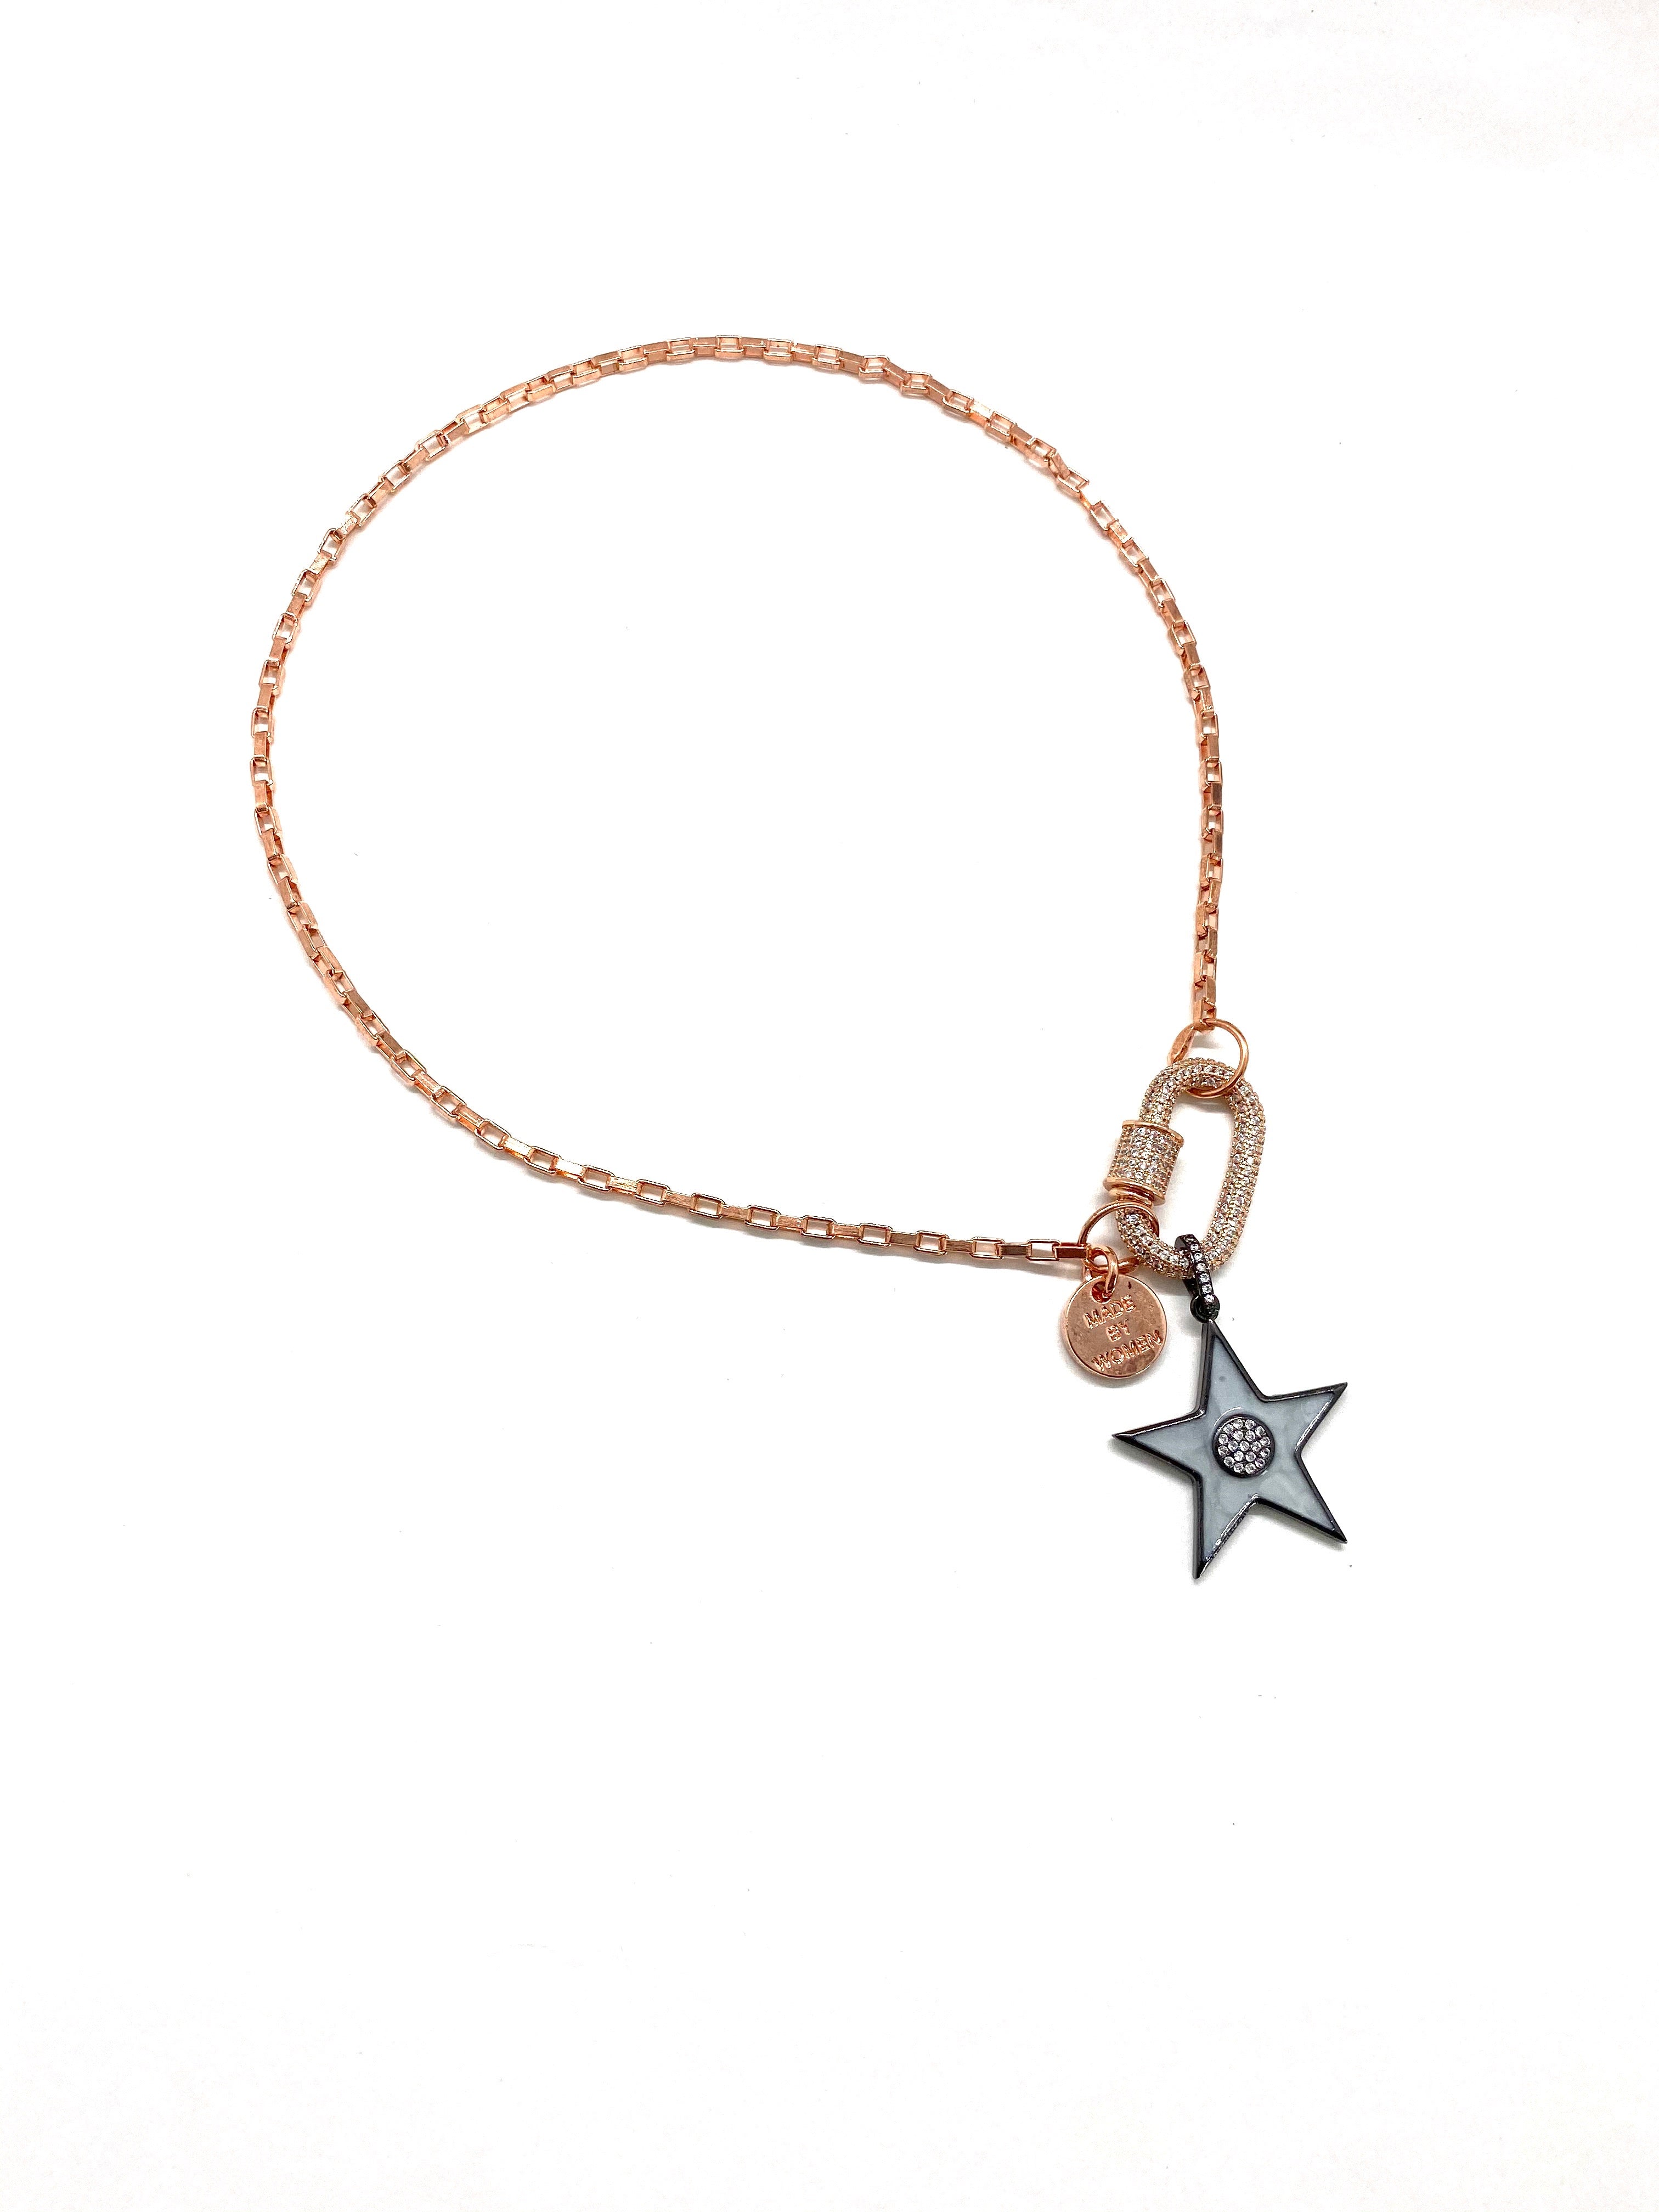 Clip to impact, rose gold chain with grey star.